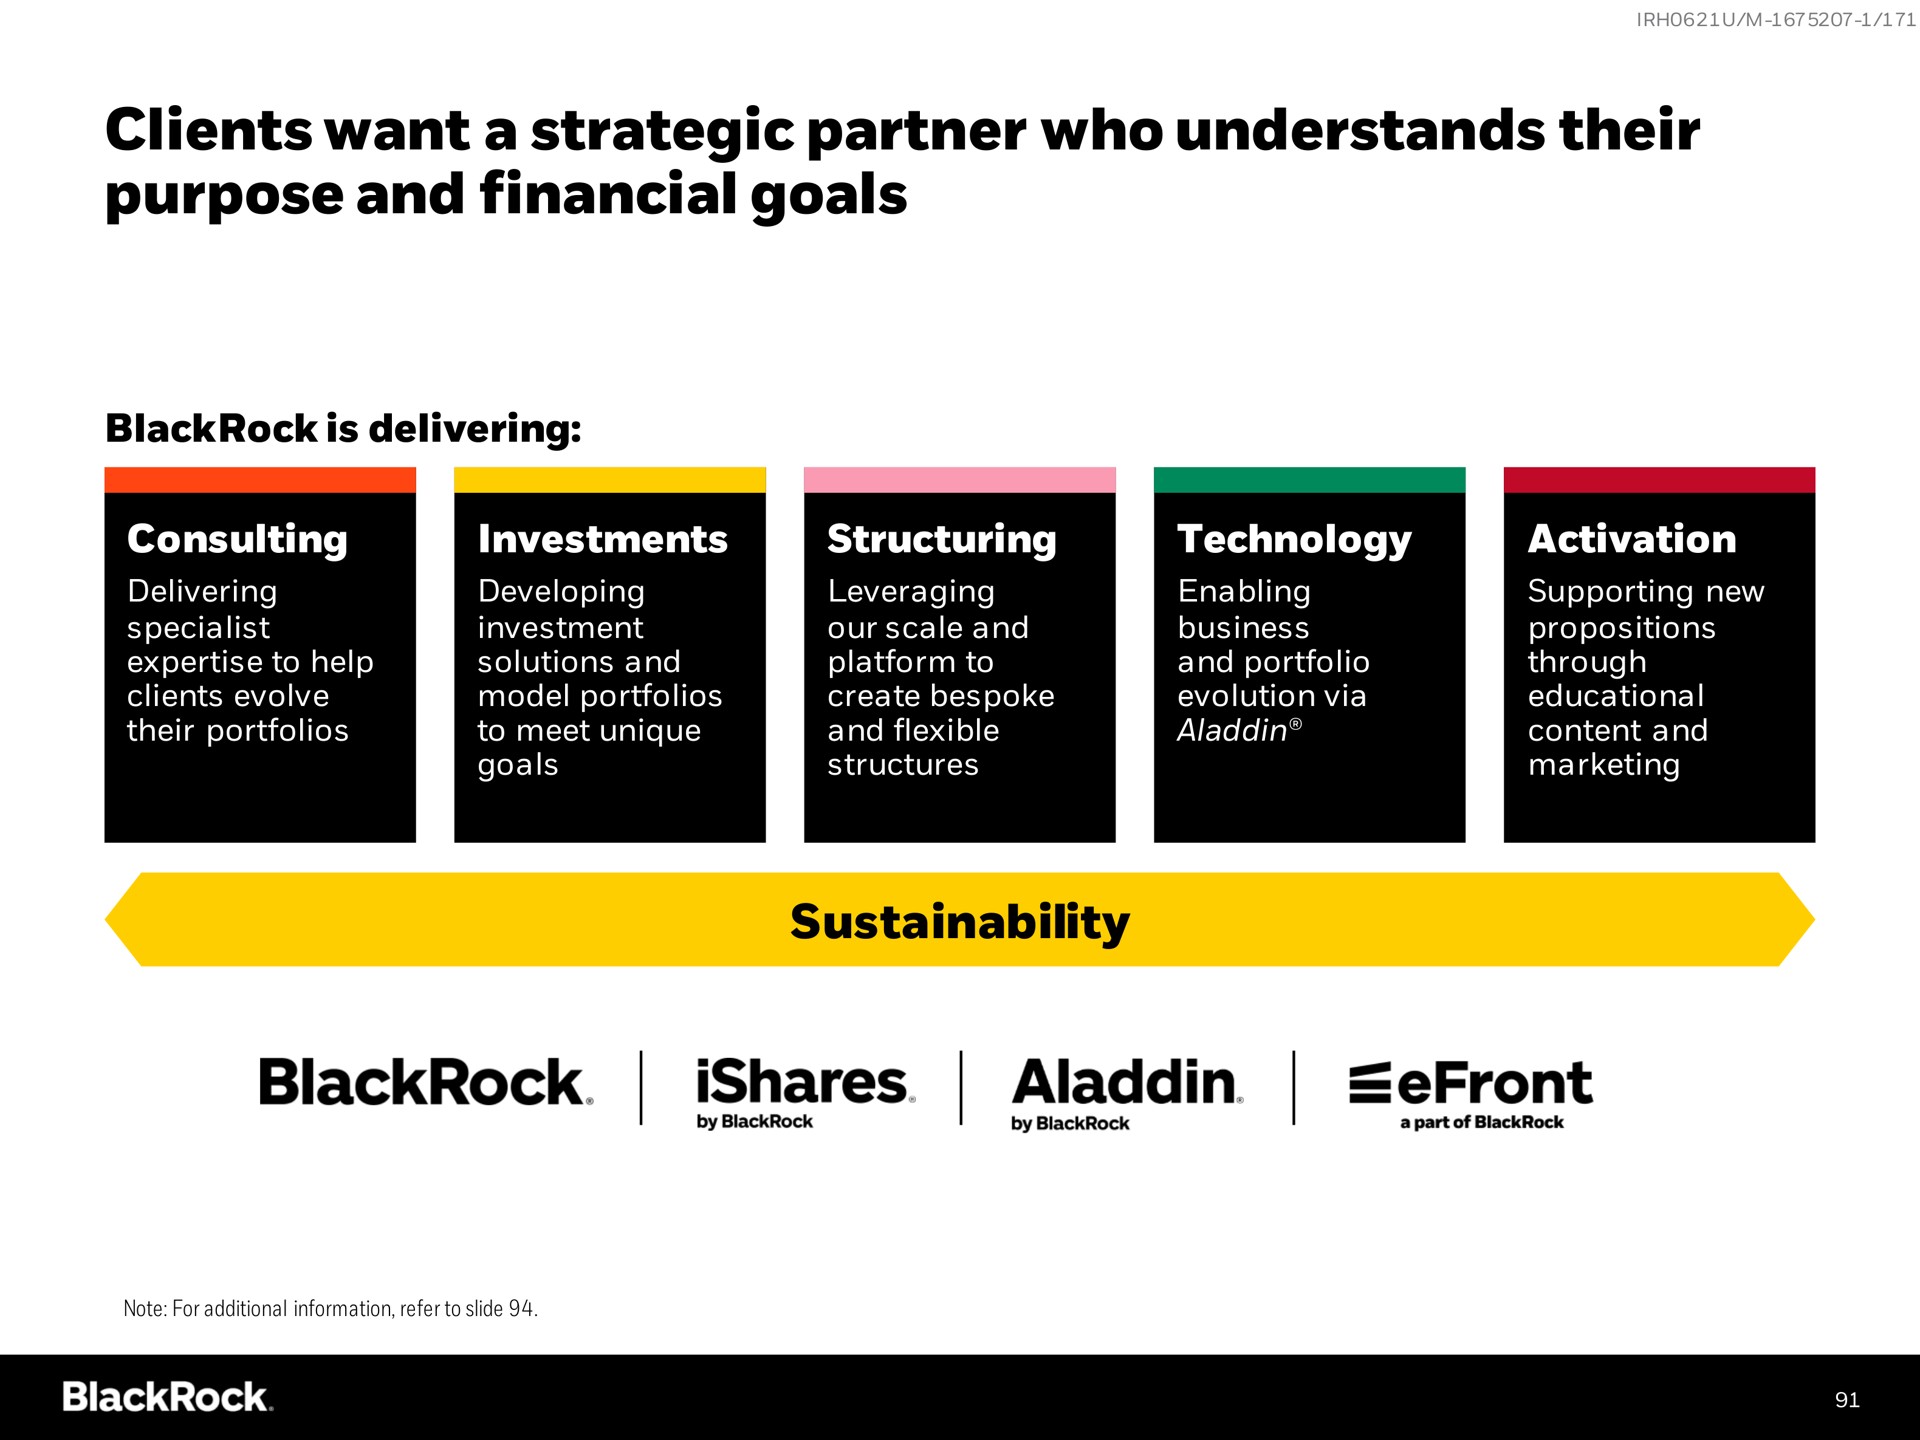 clients want a strategic partner who understands their purpose and financial goals | BlackRock